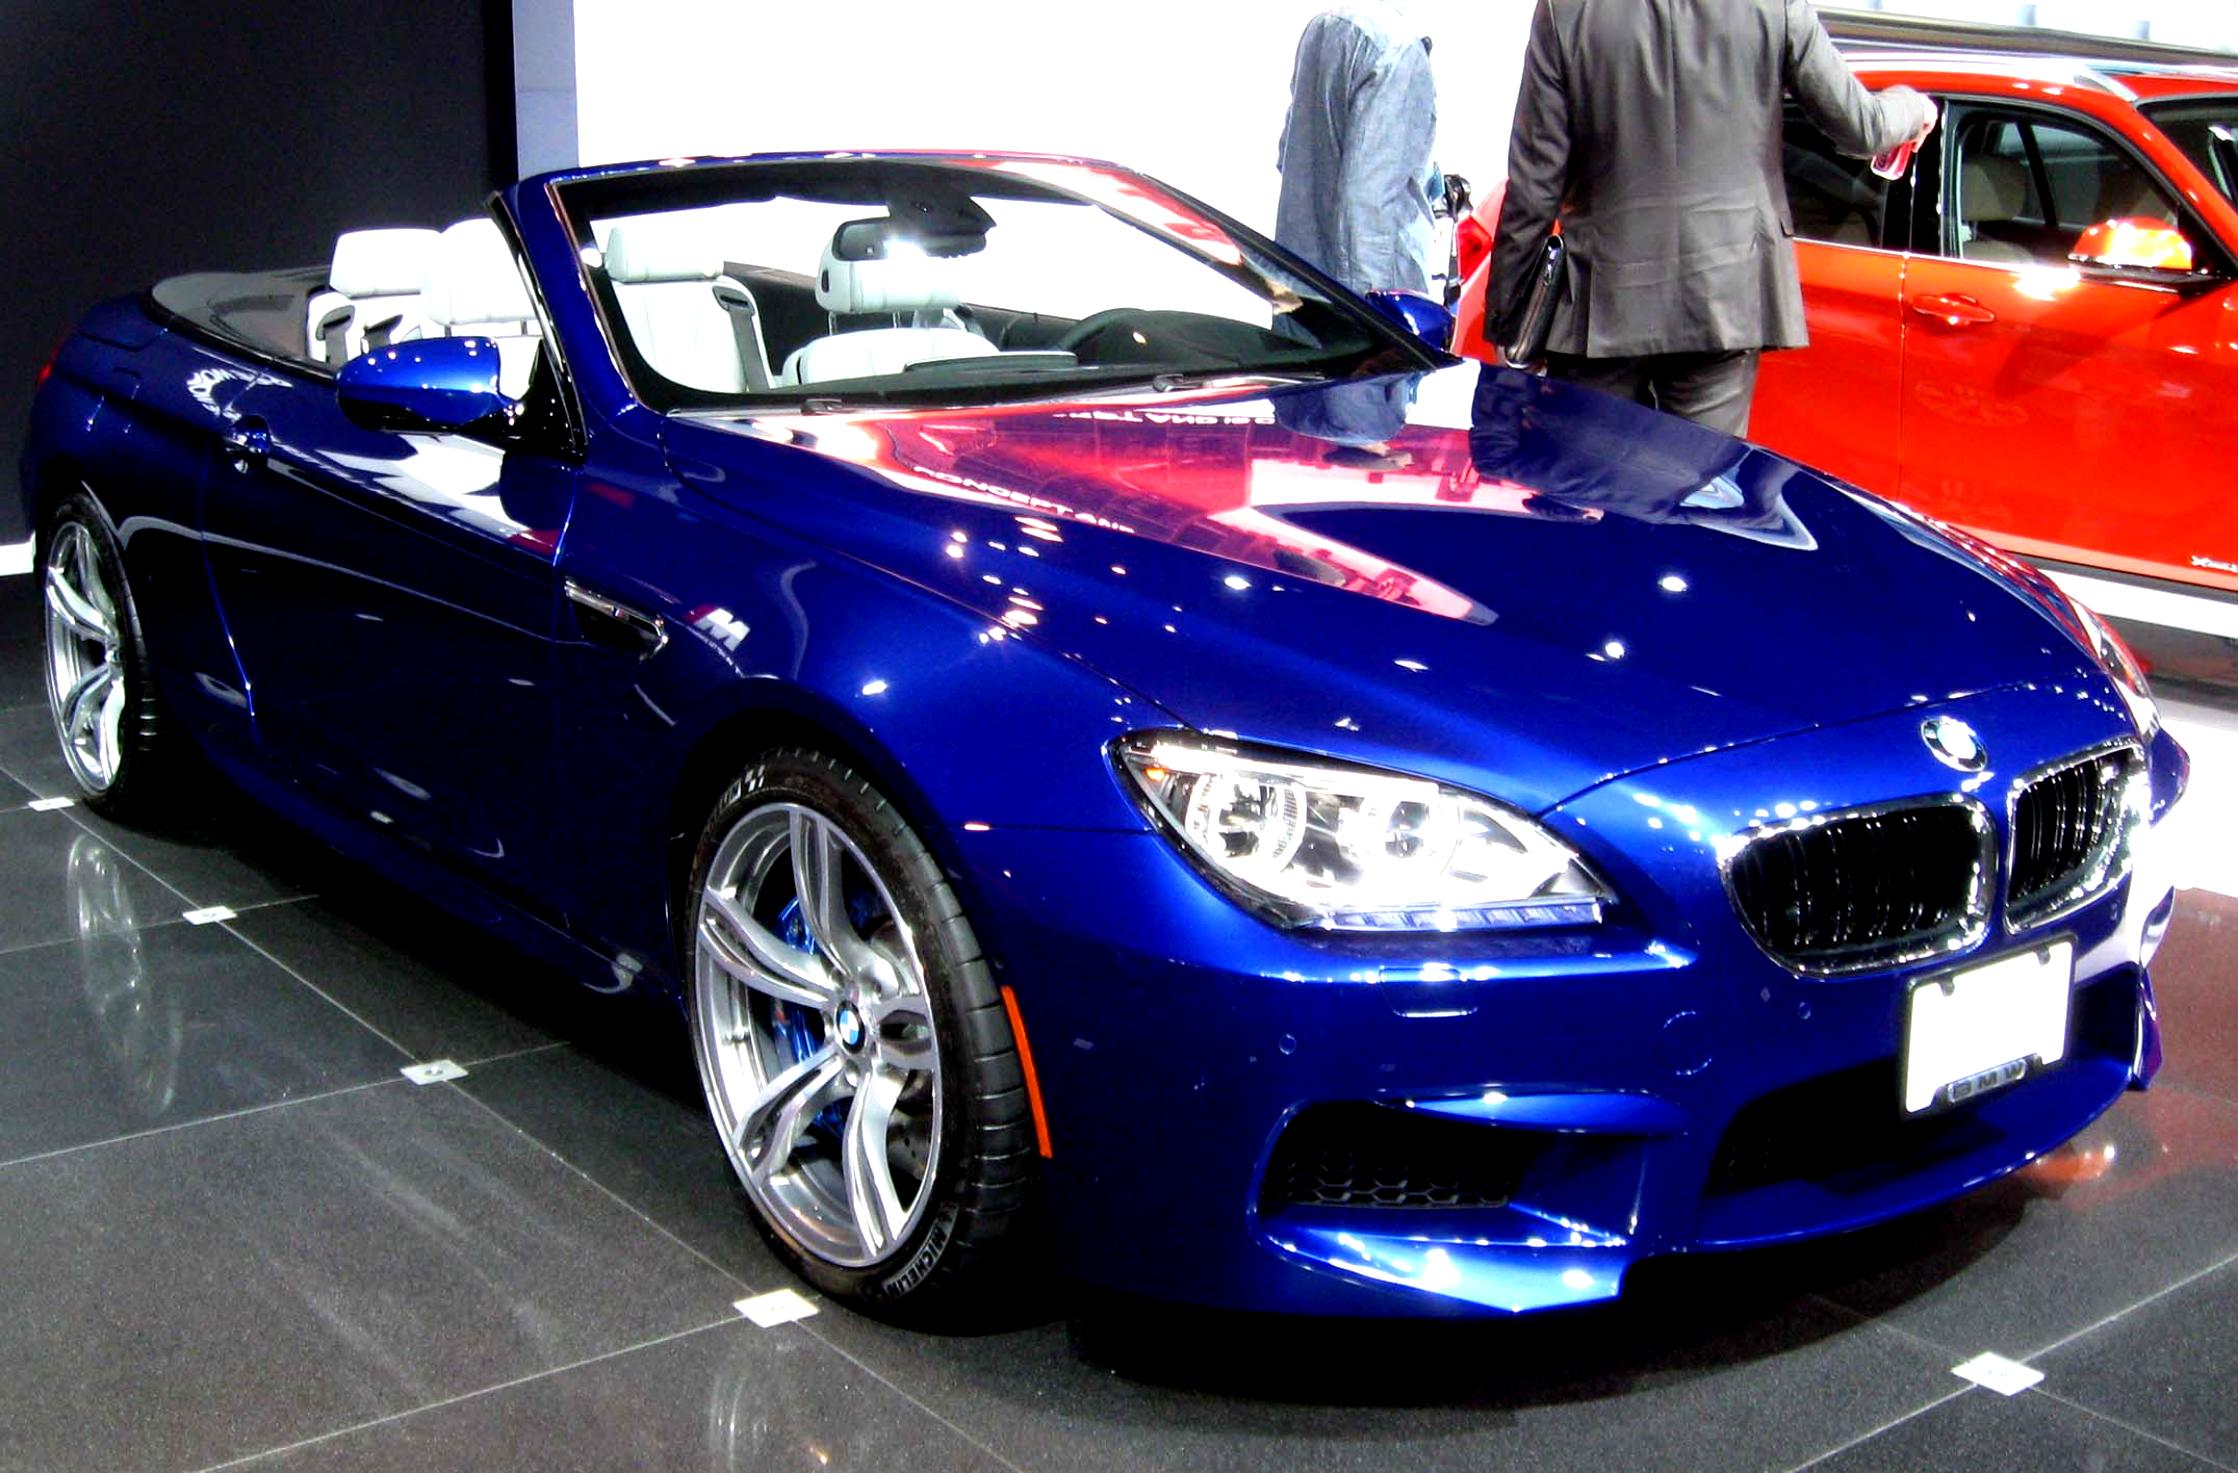 BMW M6 Coupe F13 2012 #1